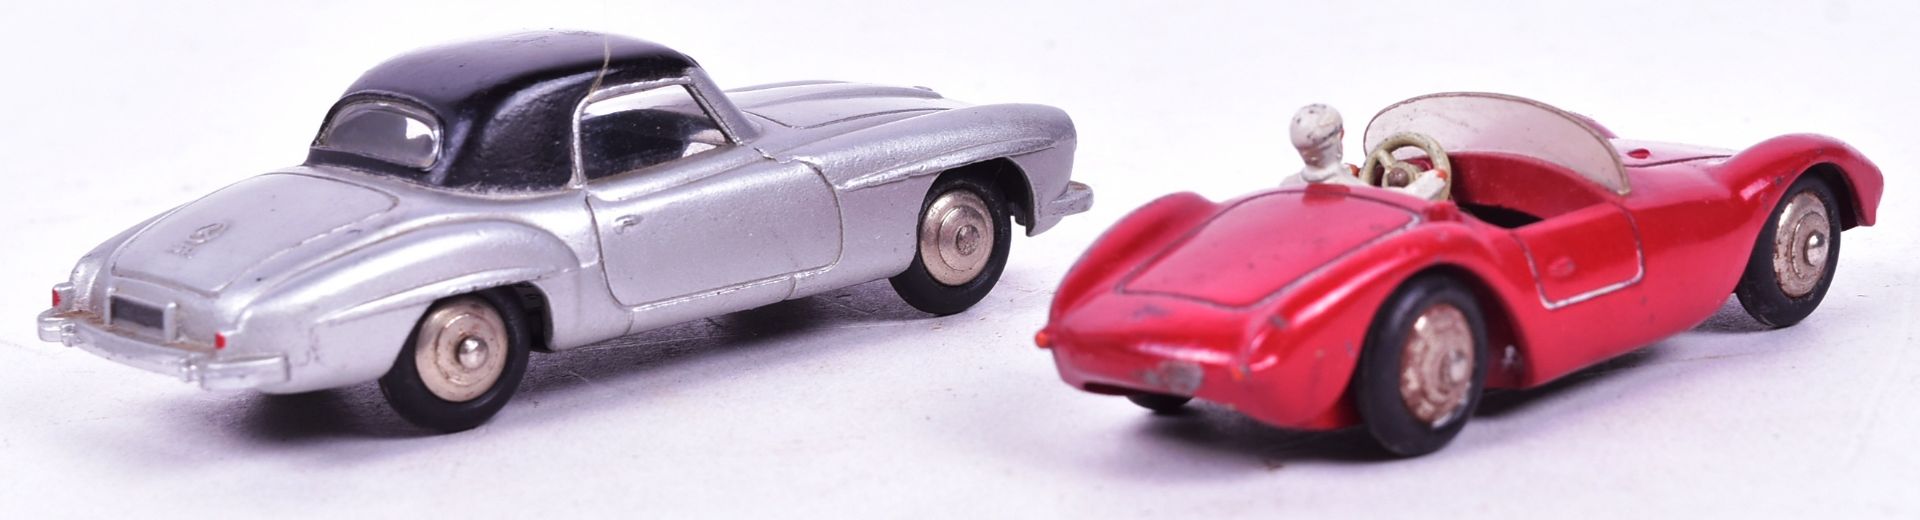 DIECAST - FRENCH DINKY TOYS - MASERATI & MERCEDES 190 SL - Image 4 of 6